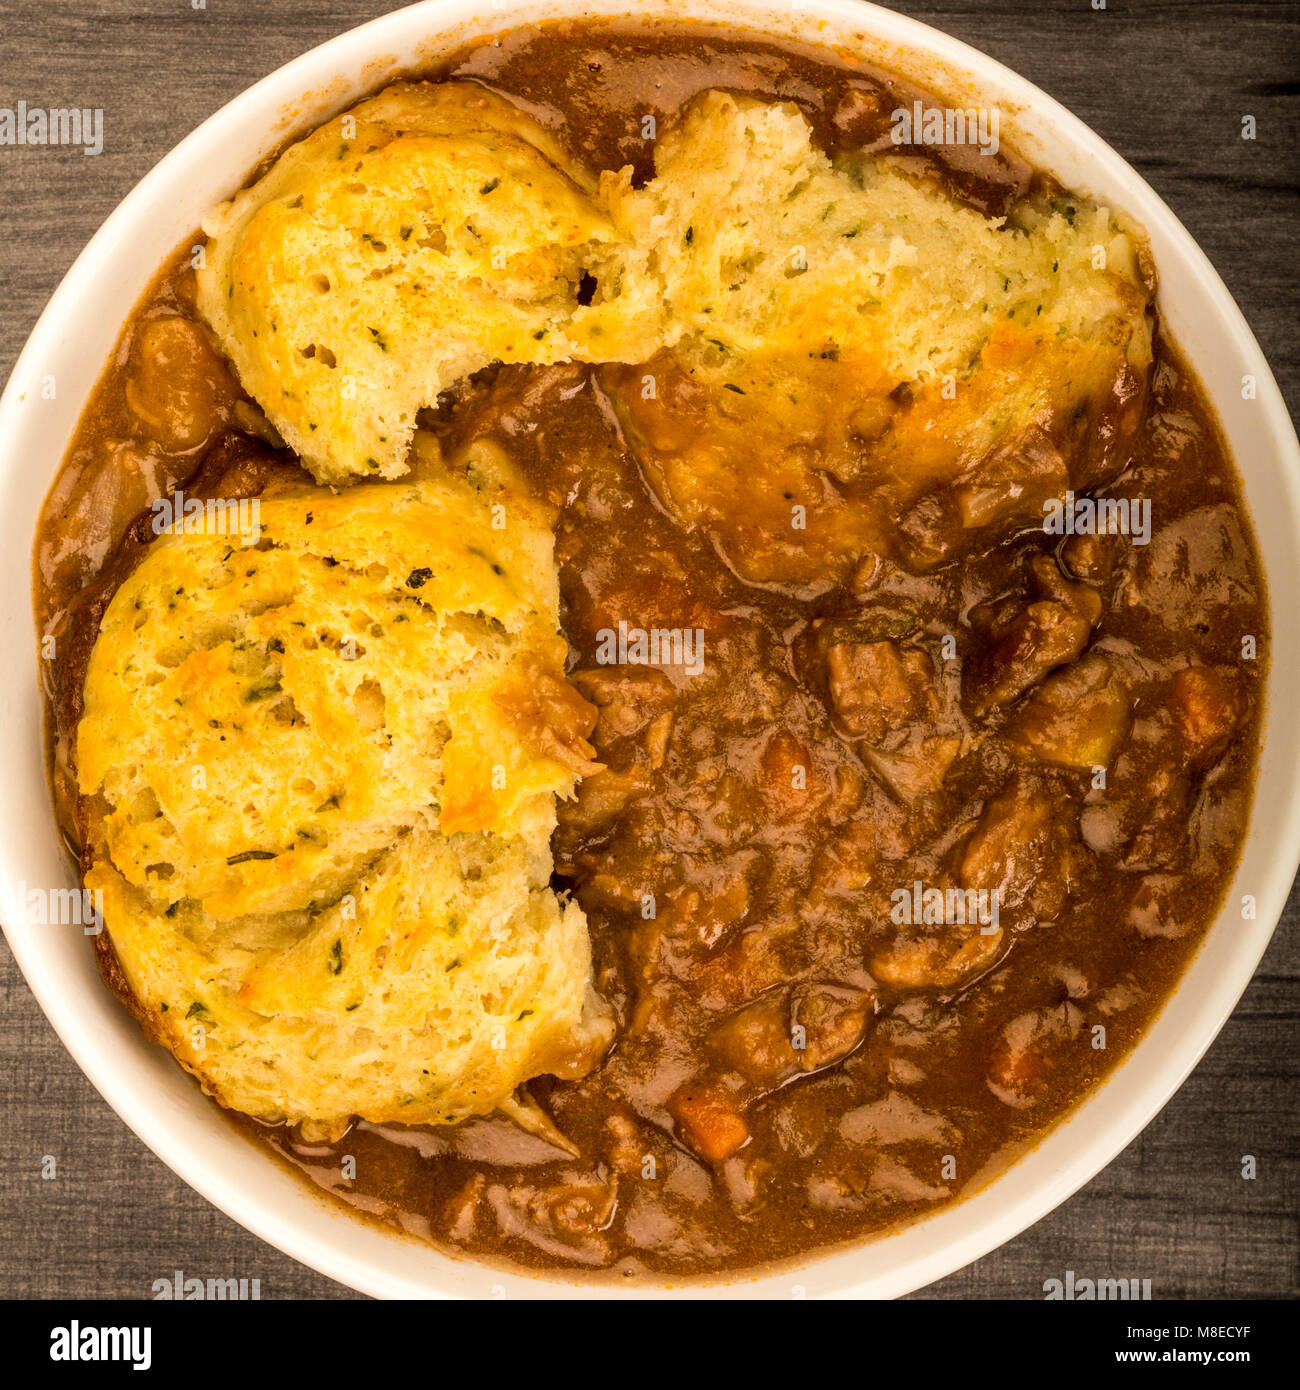 Traditional British Beef Casserole With Dumplings On A Dark Wooden Table Top Stock Photo